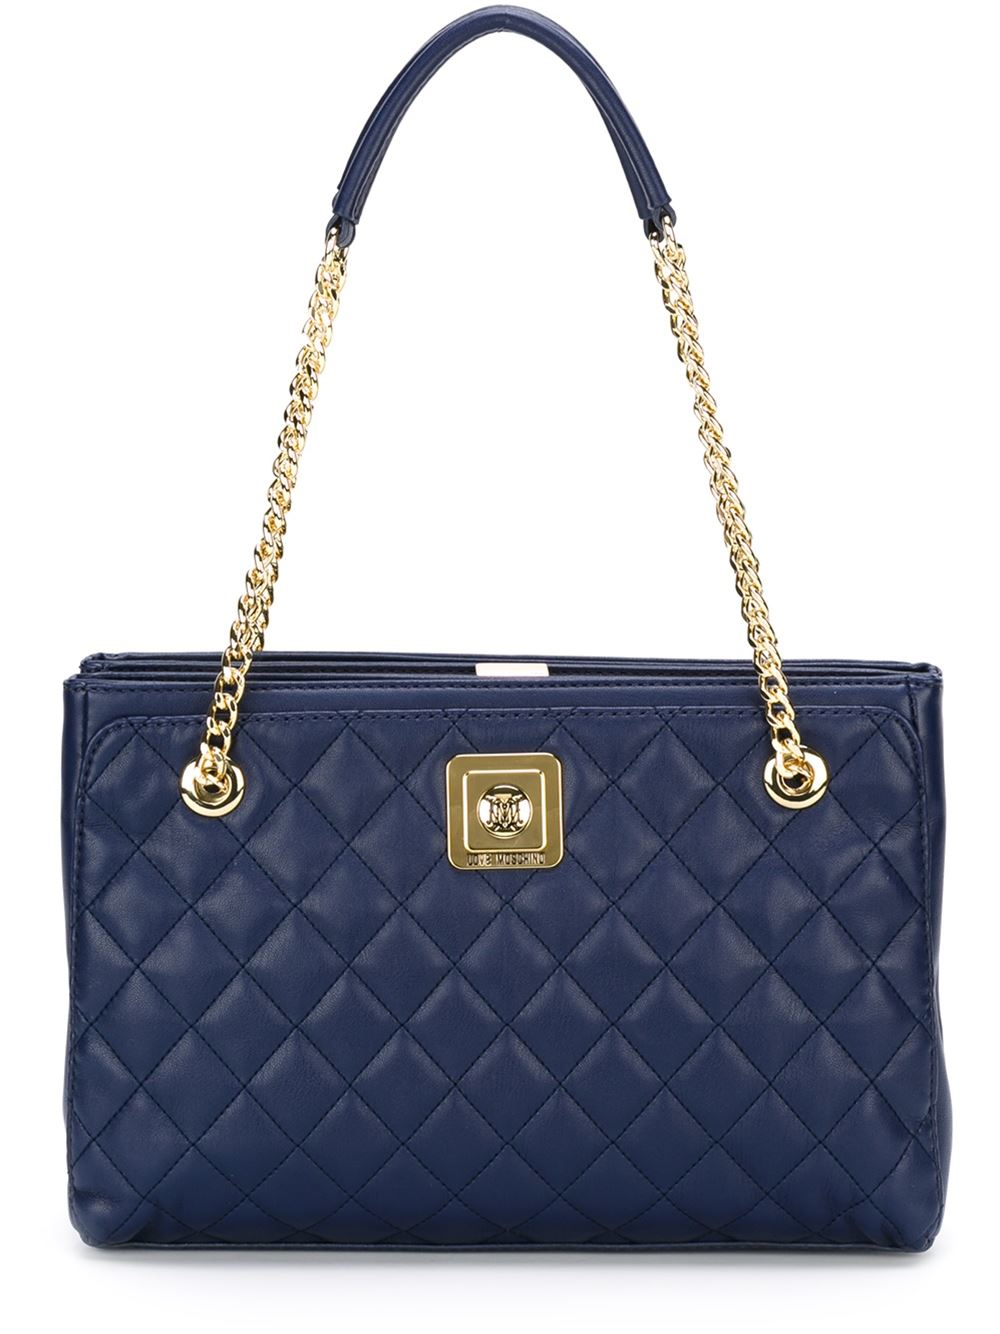 Lyst - Love moschino Quilted Shoulder Bag in Blue